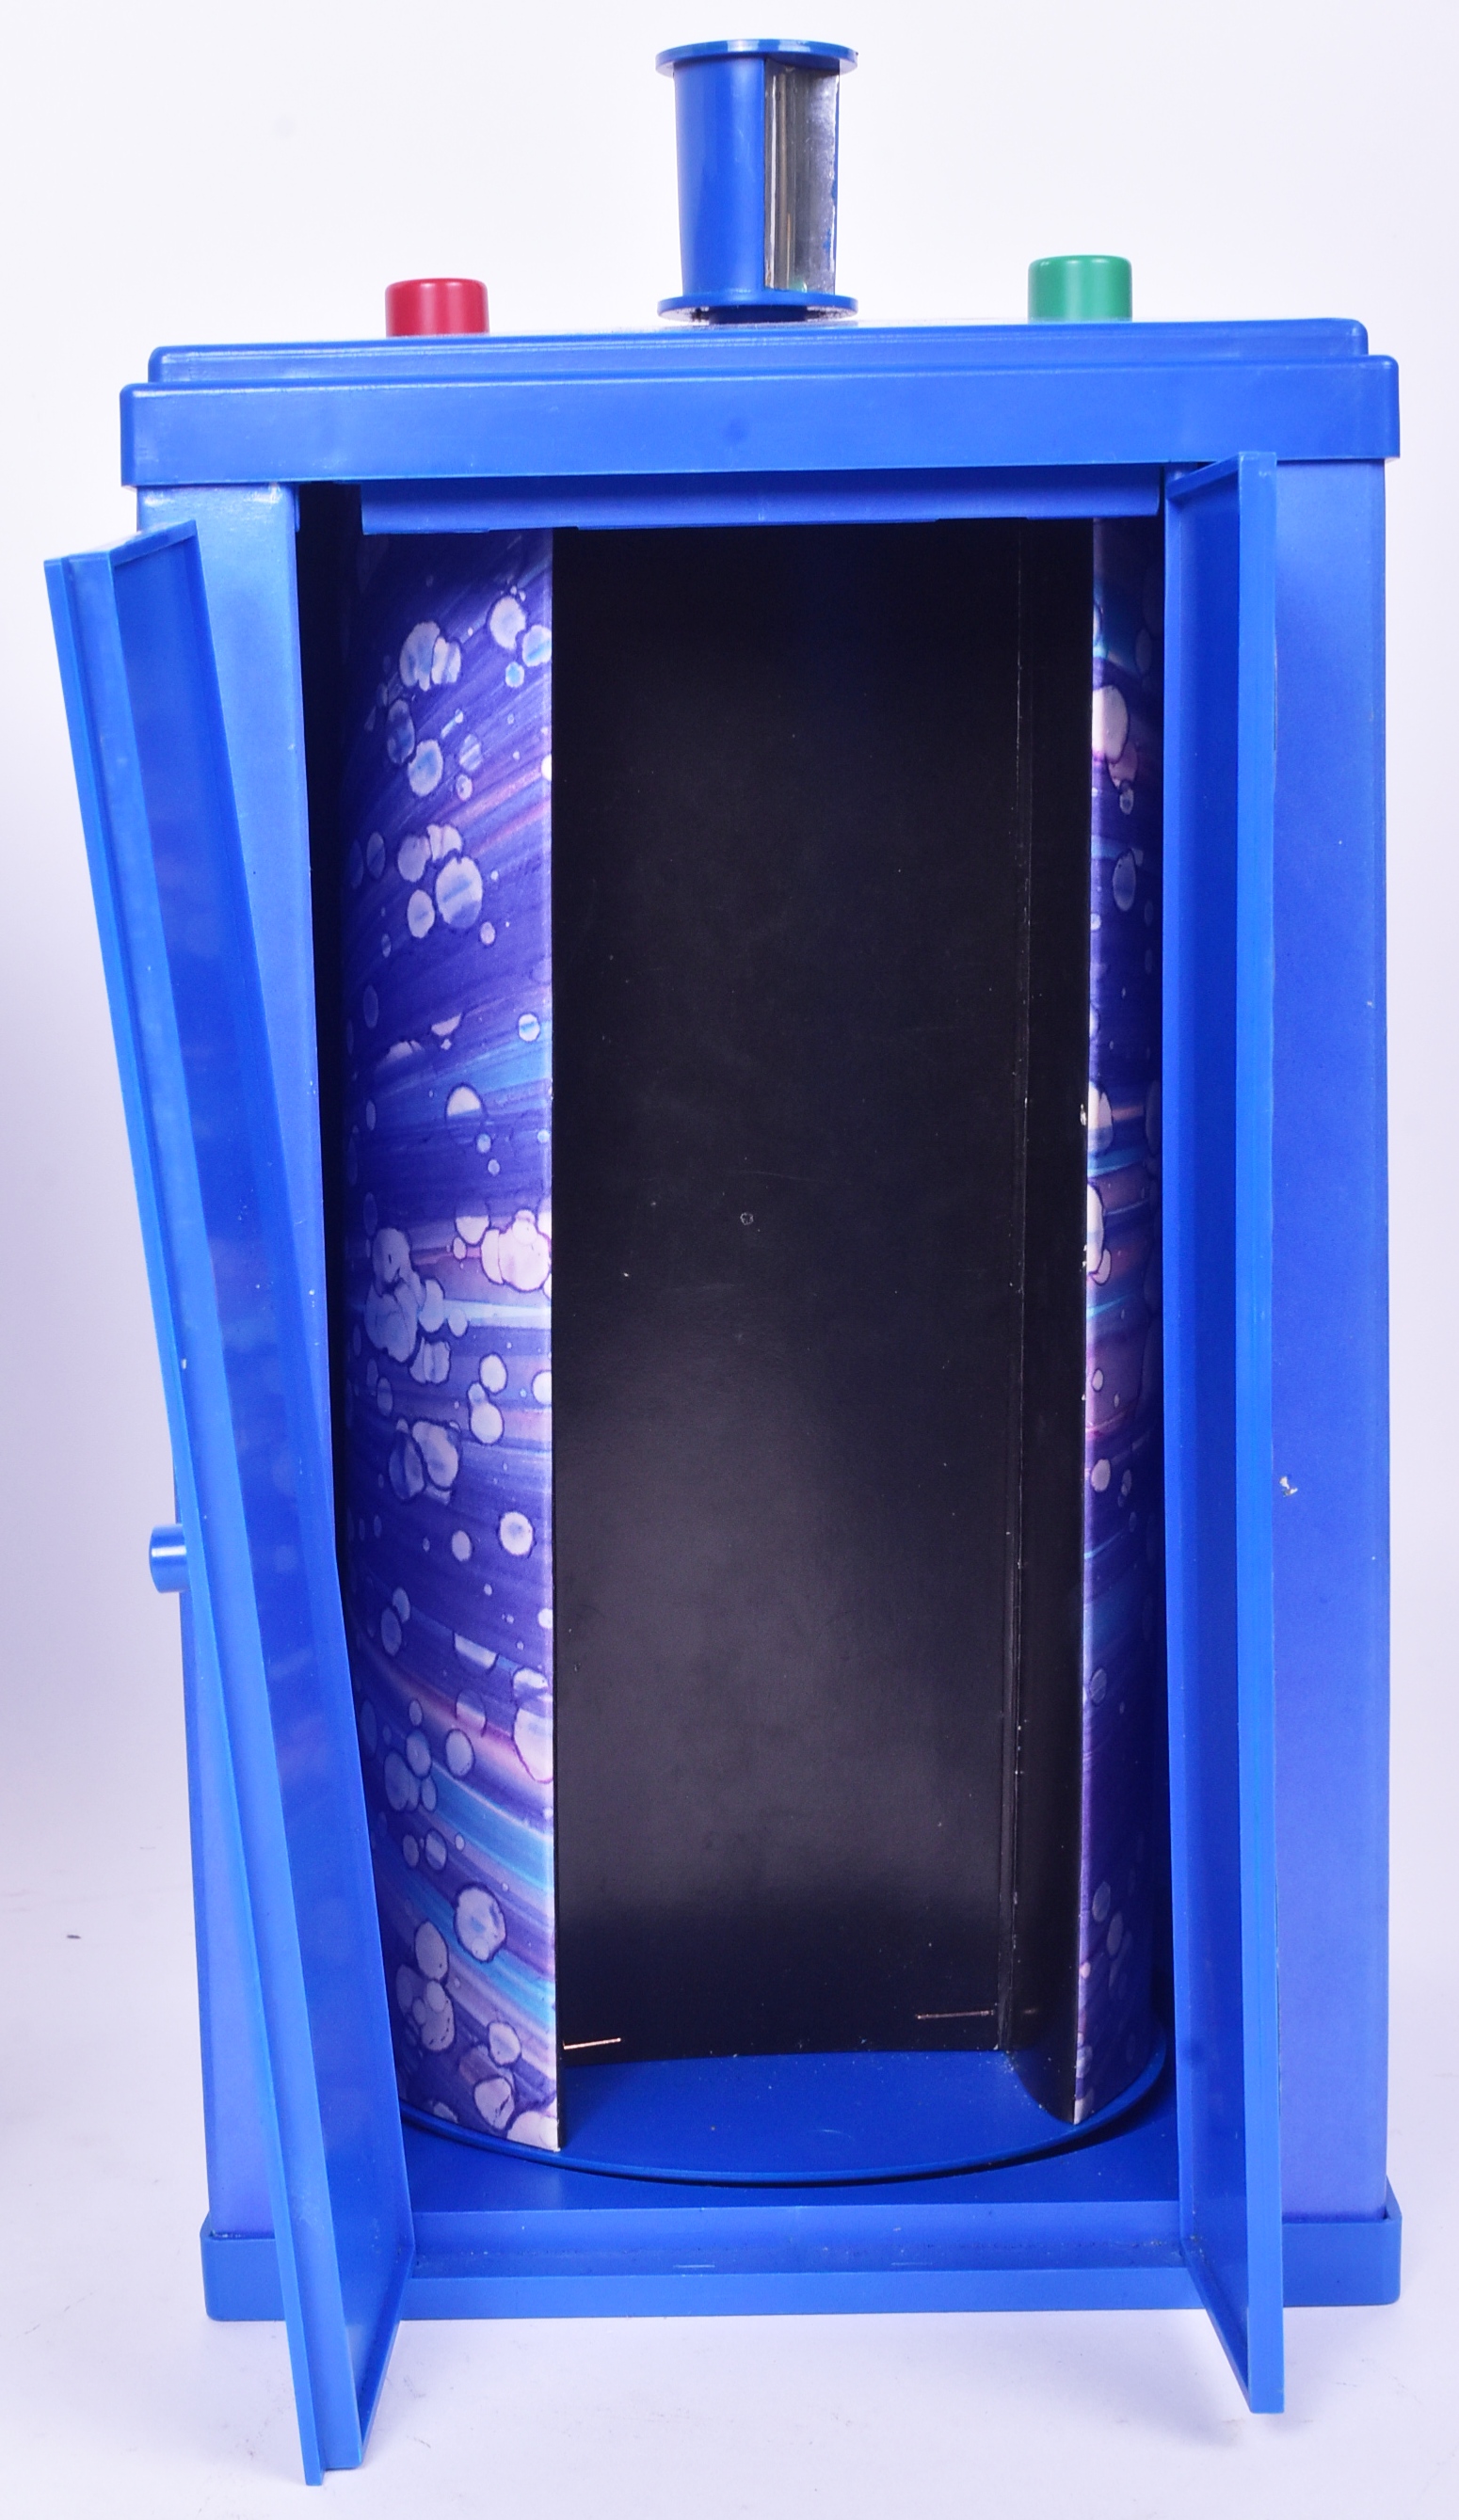 DOCTOR WHO - DENYS FISHER - VINTAGE TARDIS PLAYSET - Image 4 of 5